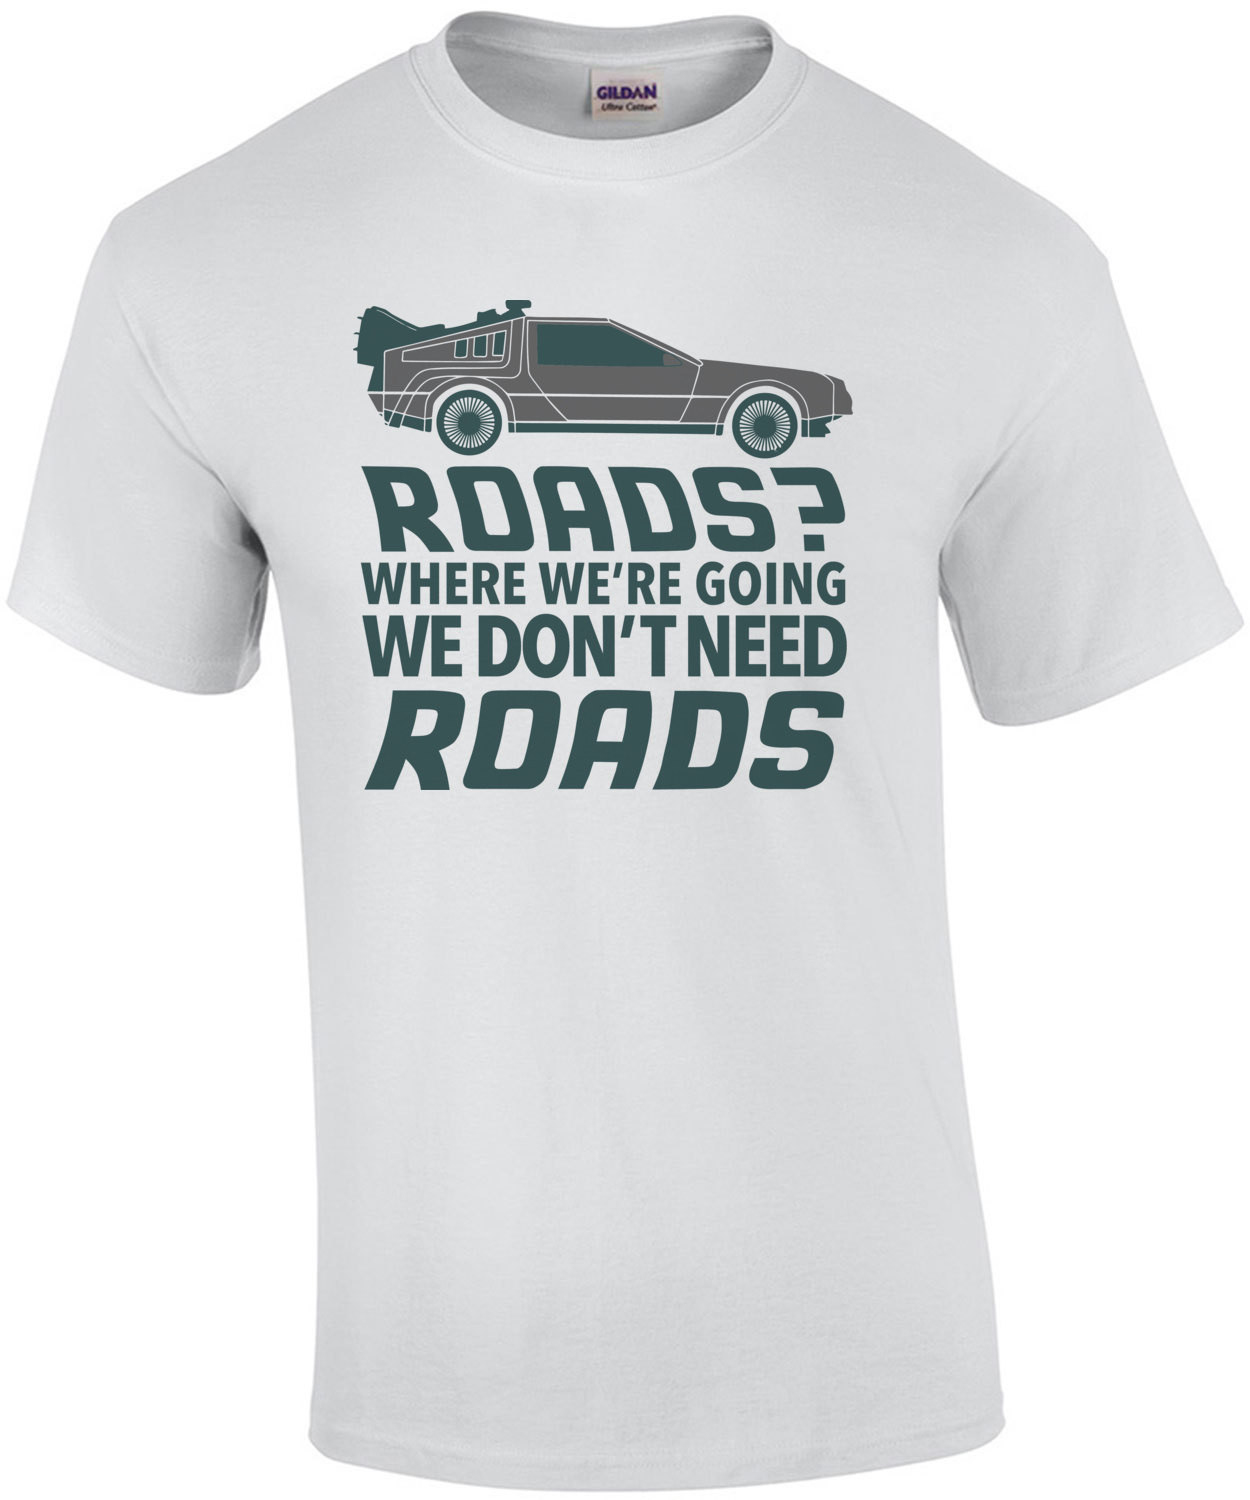 Roads? Where we're going we don't need roads - Back to the future t-shirt - 80's t-shirt